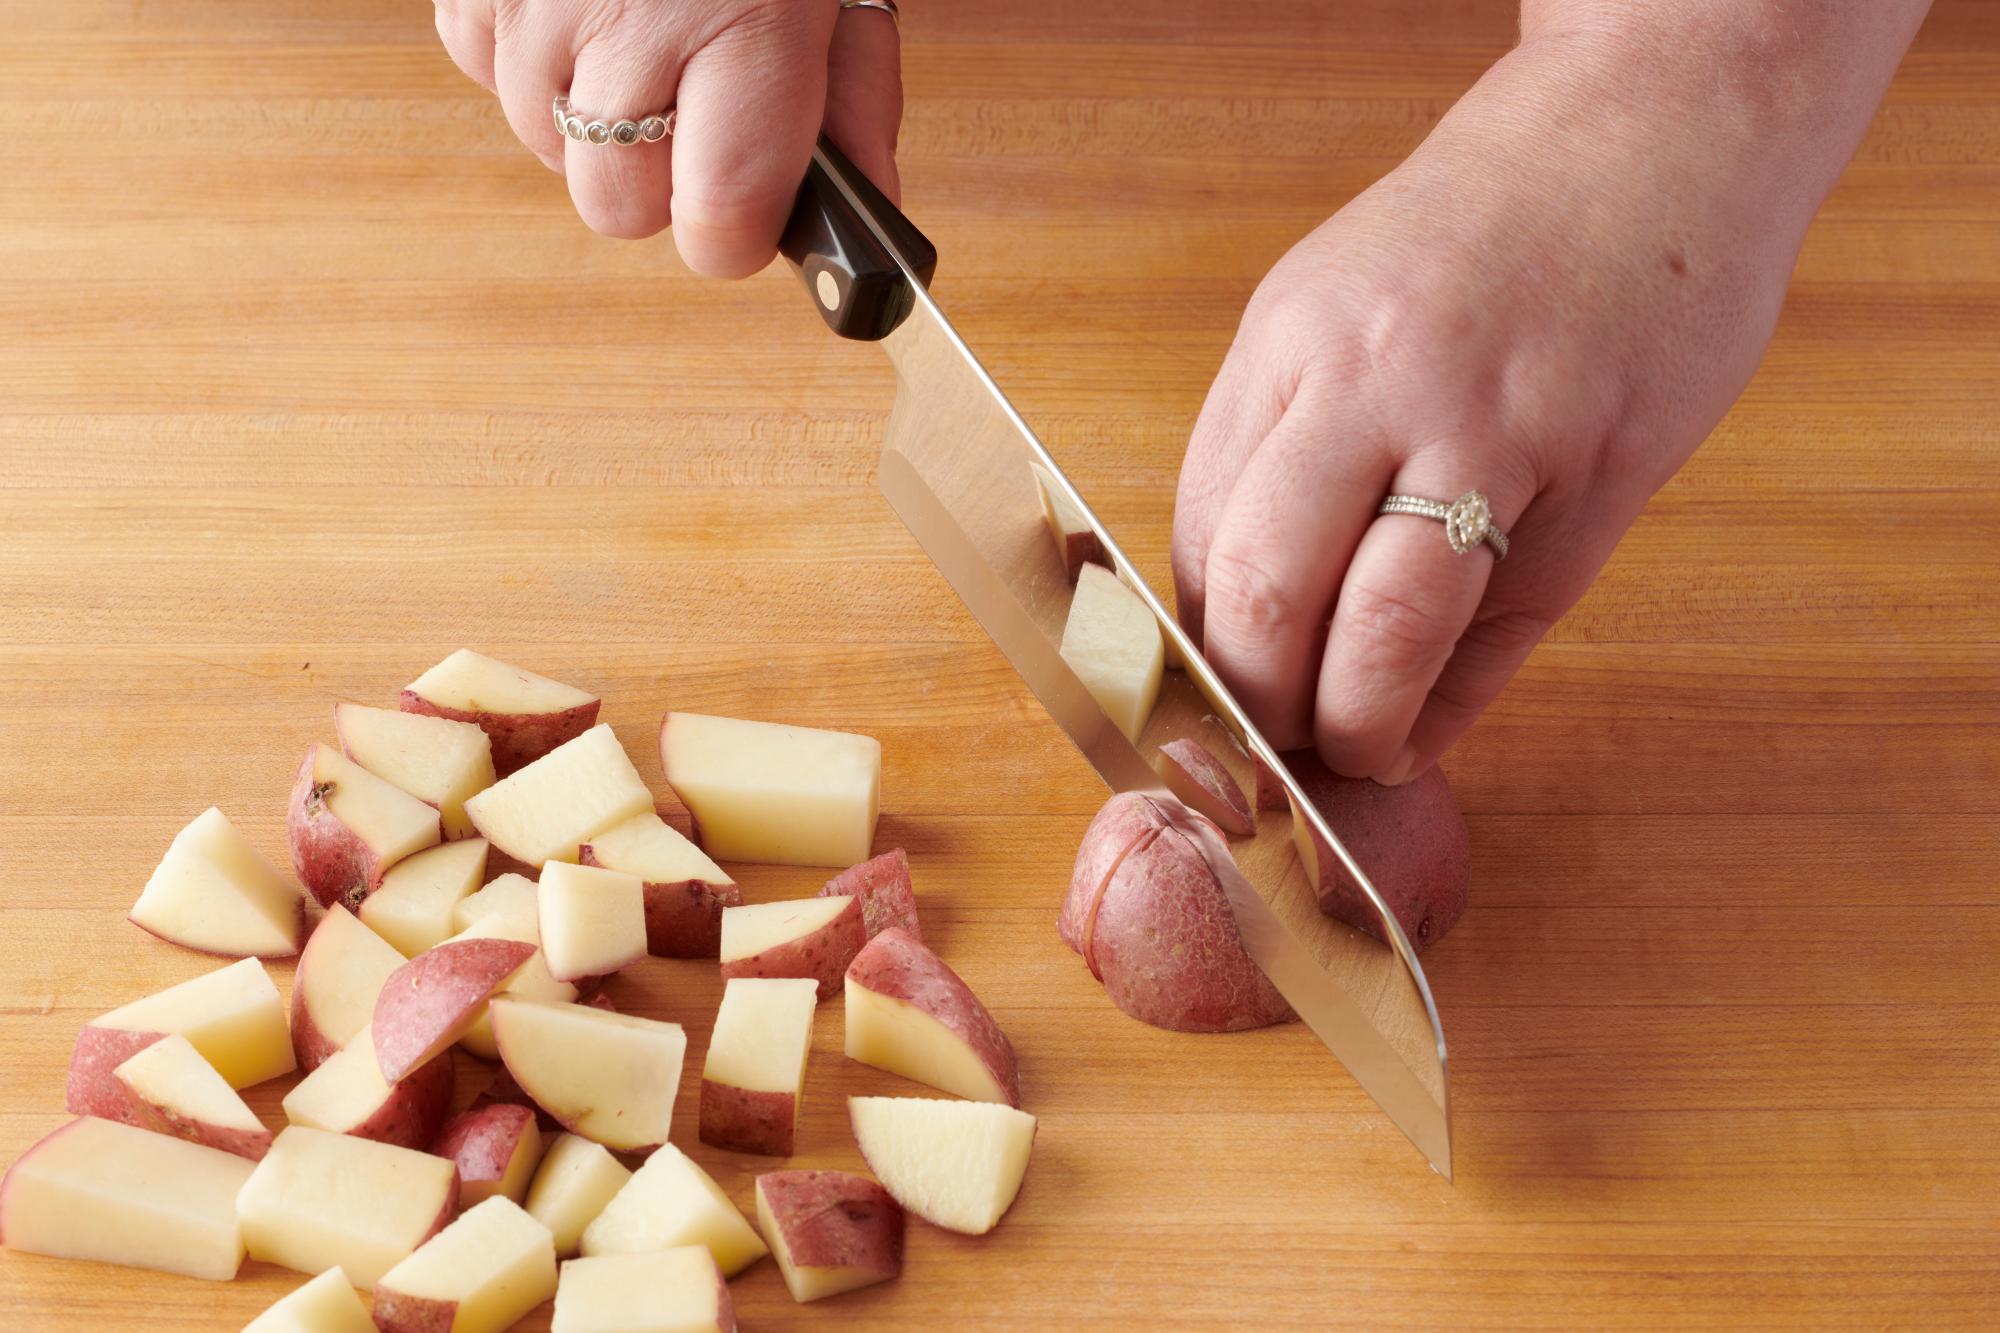 Cutting the red potatoes with a Santoku.